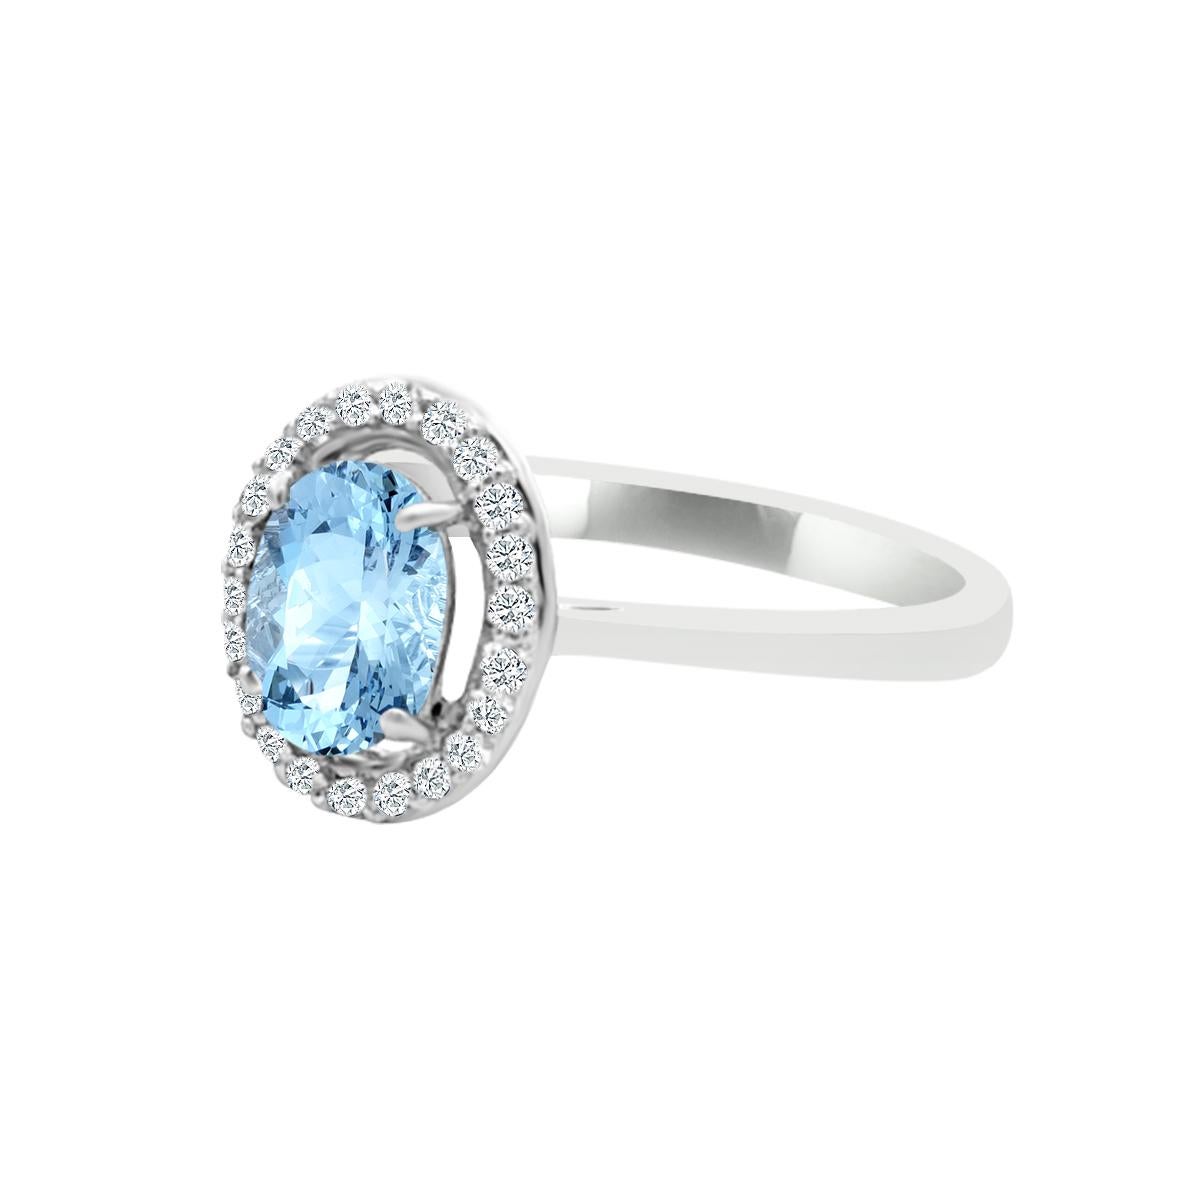 Modern 14K White Gold 0.70cts Aquamarine And Diamond Ring. Style# TS1310AQR 22028/10 For Sale